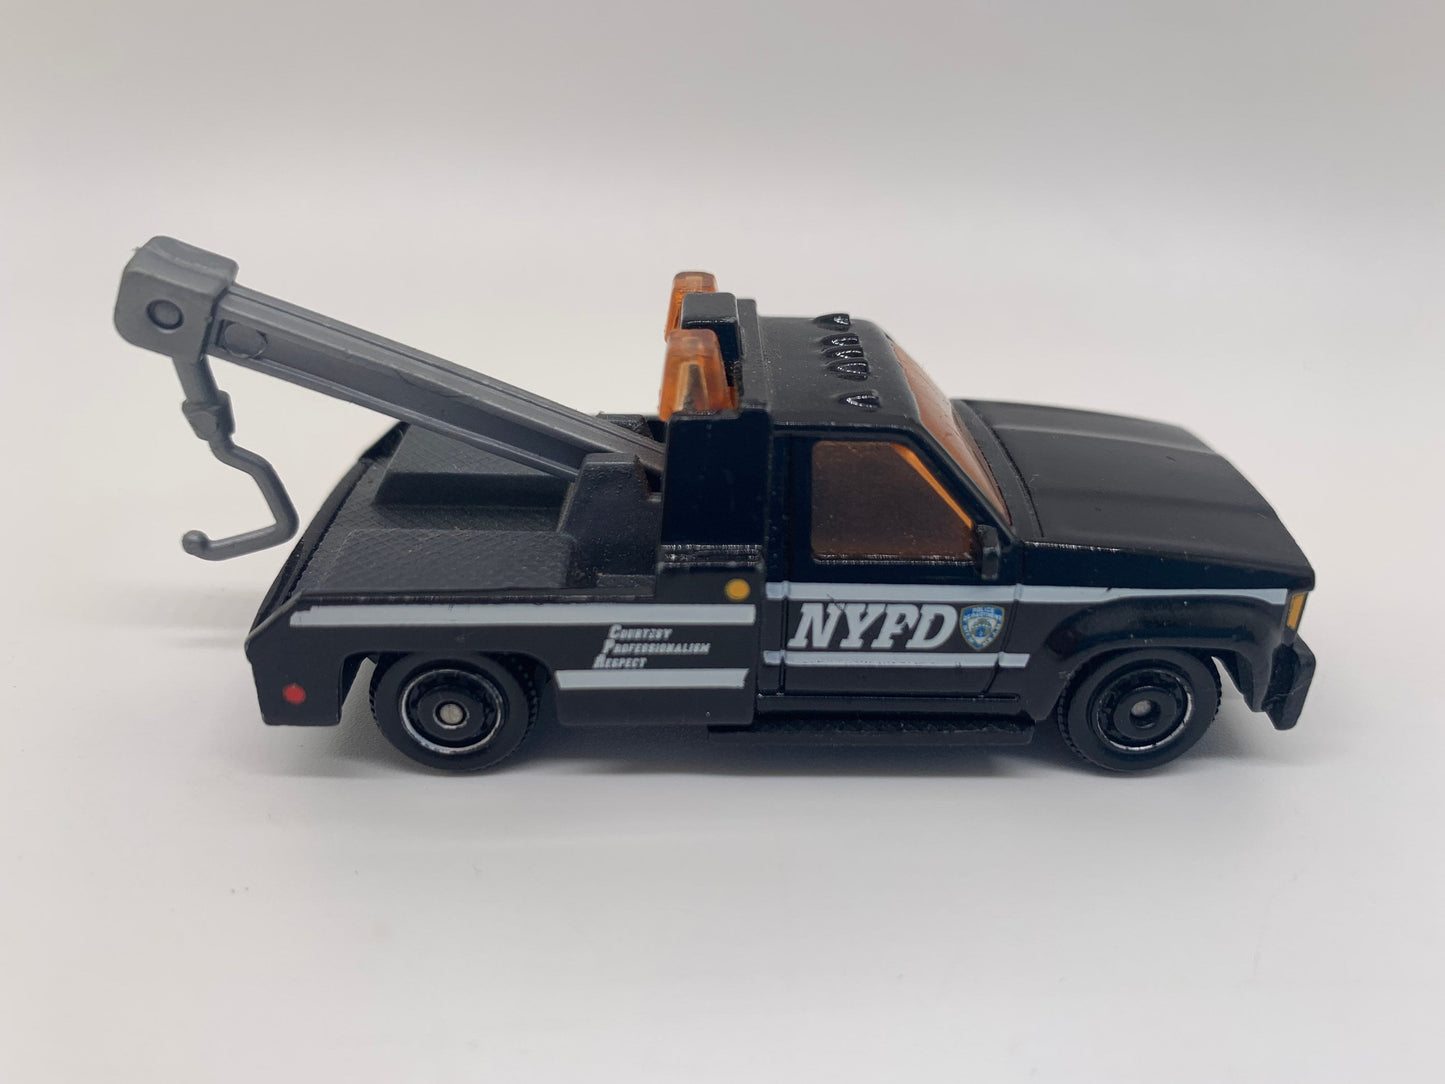 Matchbox GMC Wrecker NYPD Tow Truck Dark Blue and White Police Rescue Perfect Birthday Gift Miniature Collectable Scale Model Toy Car